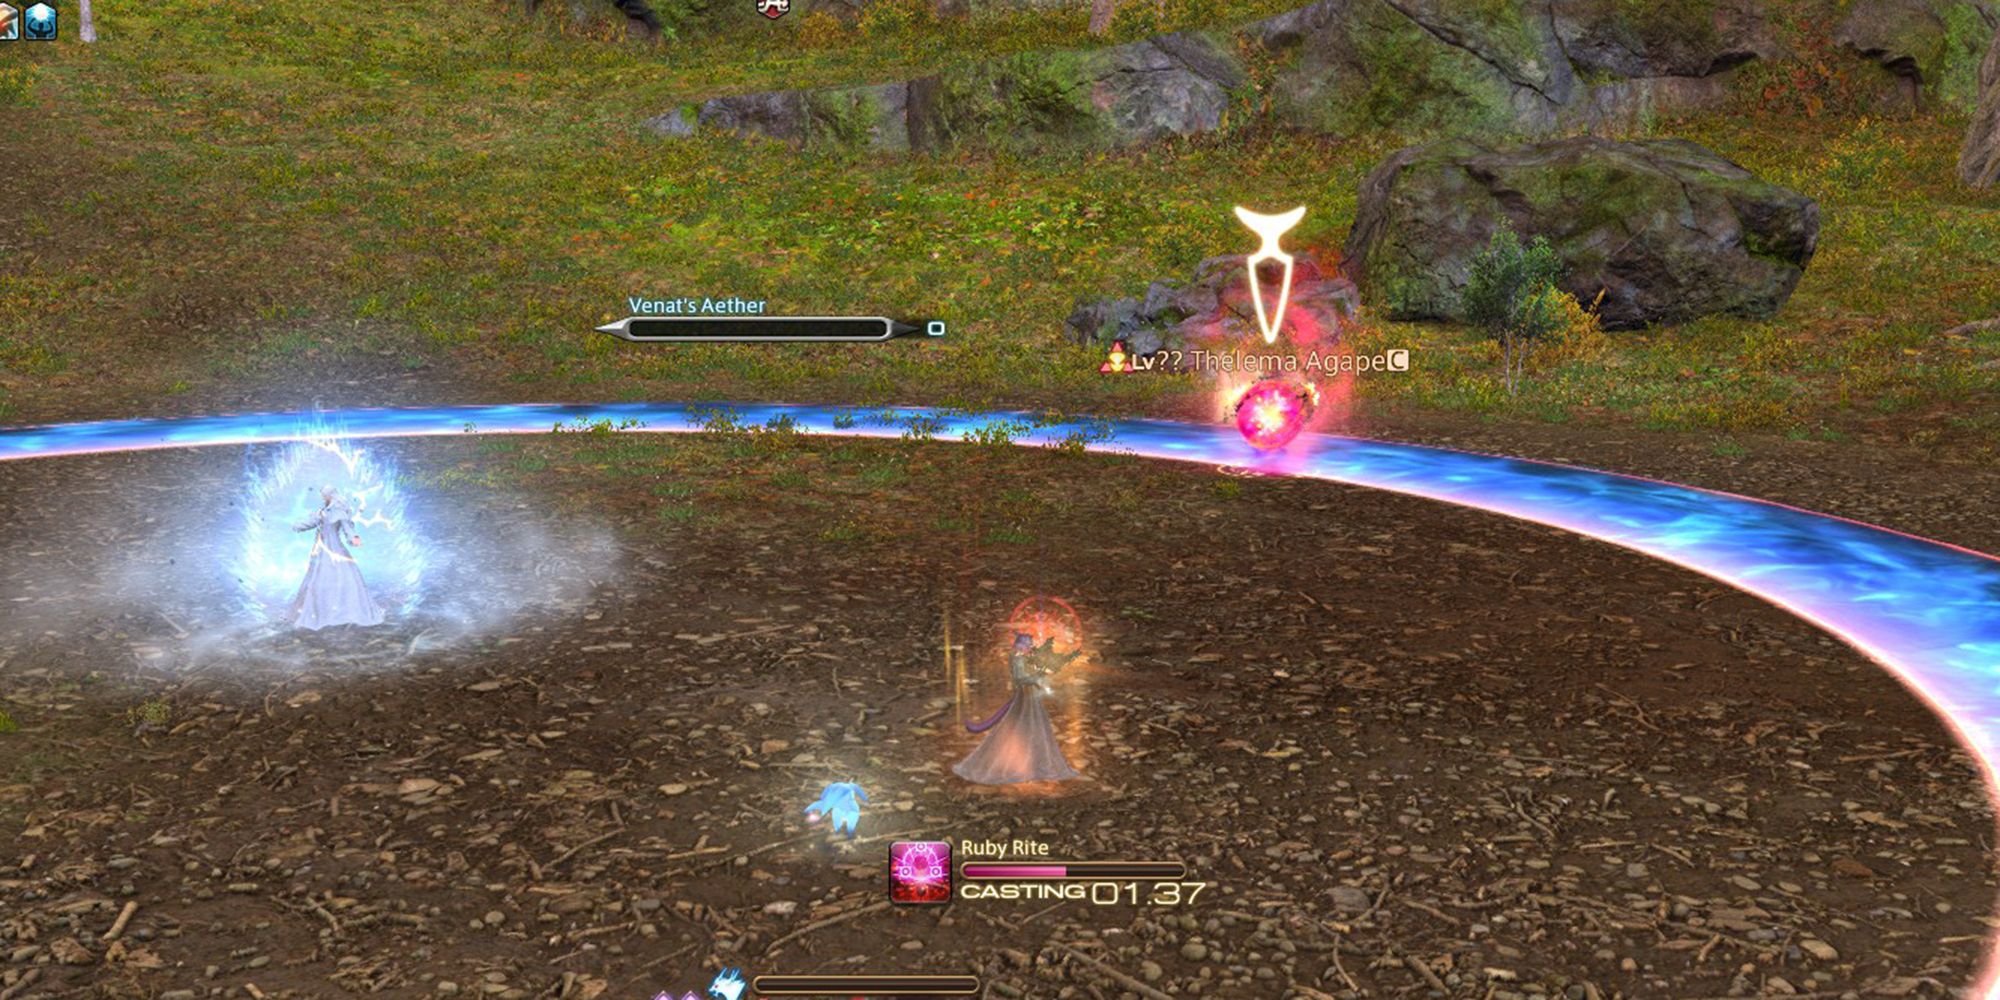 thelema agape moving towards venat, attempting to charge her aether